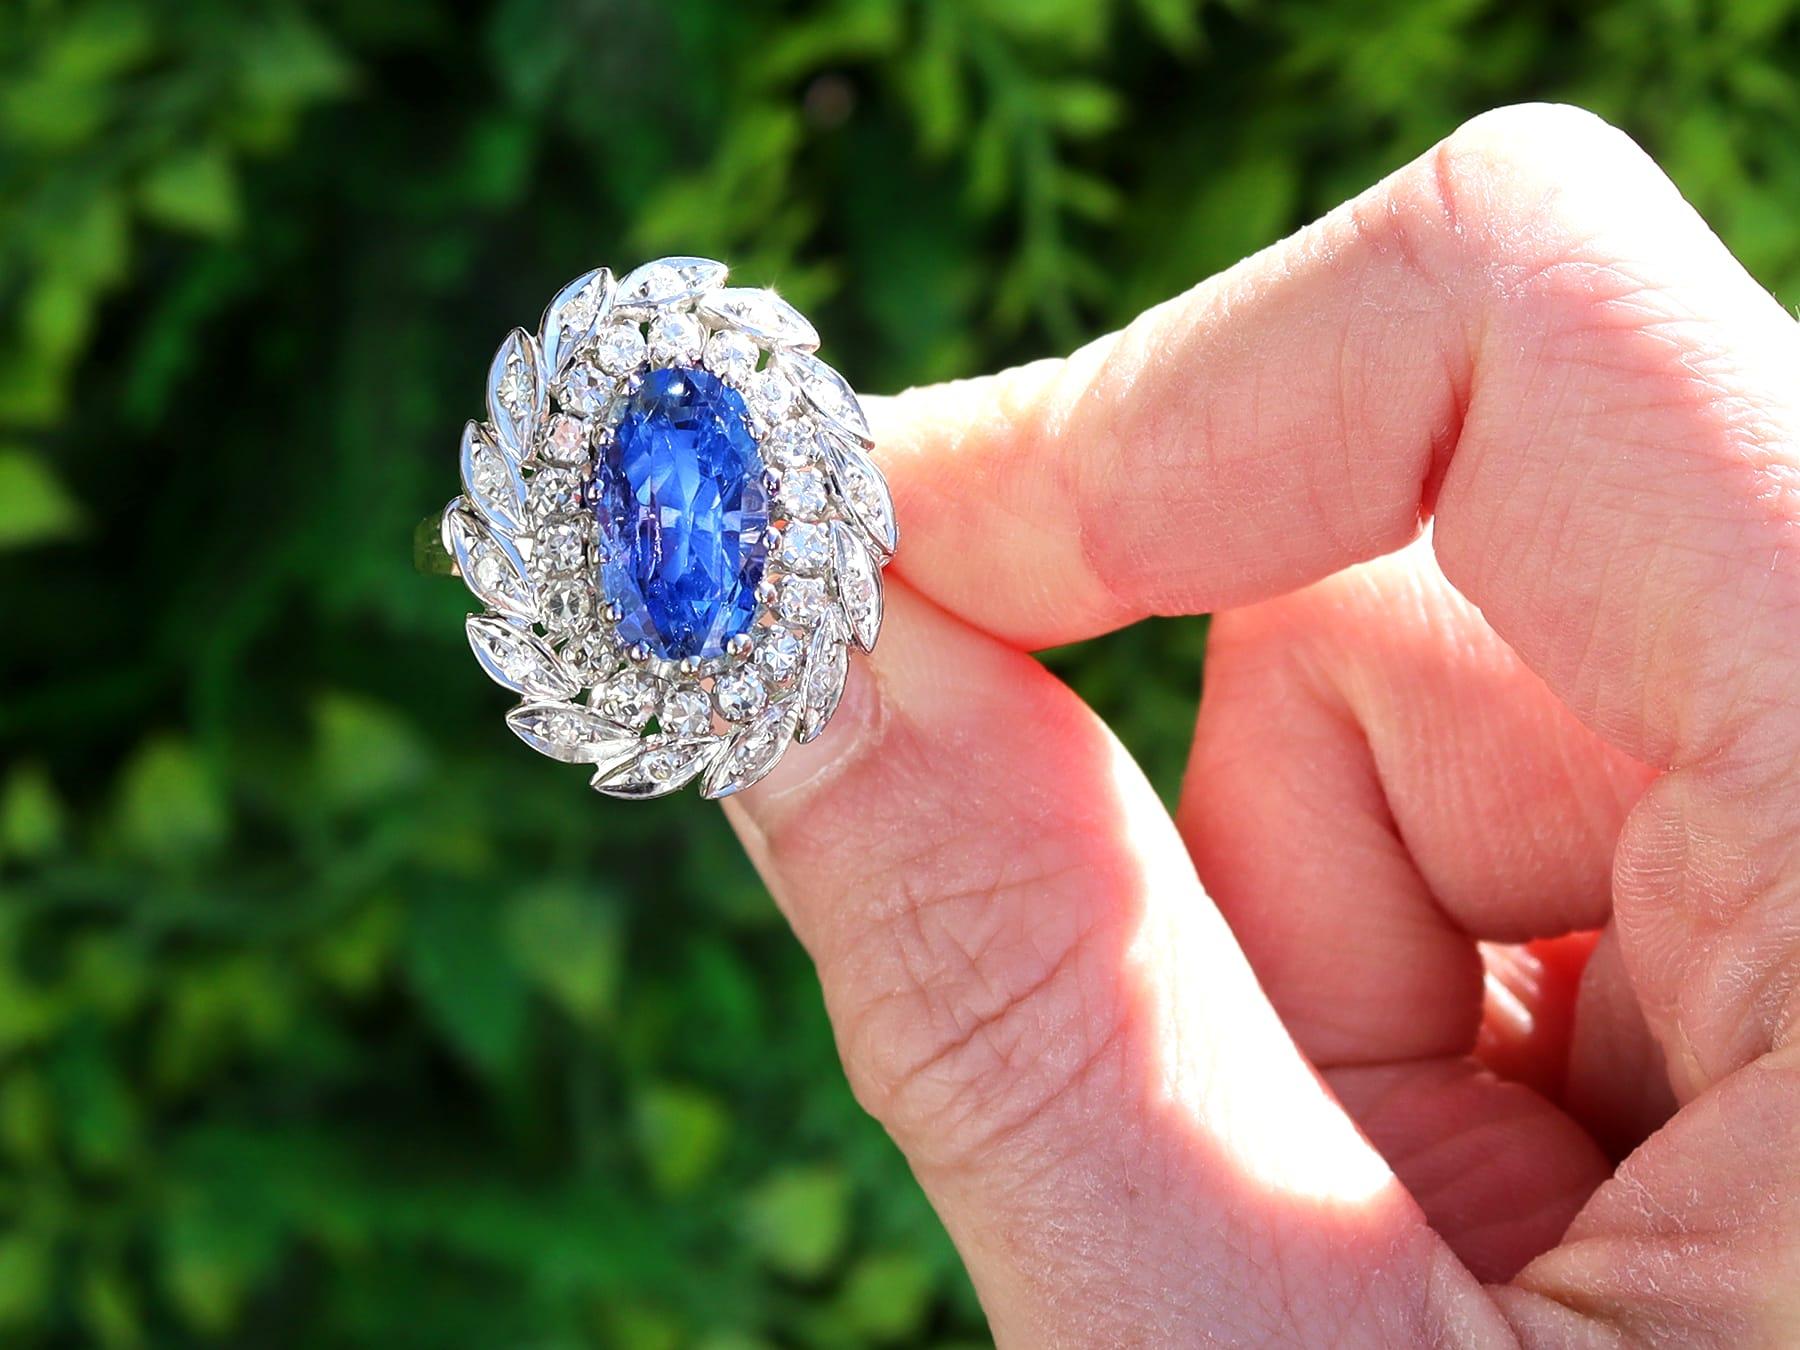 A stunning 4.80 carat Ceylon sapphire and 1 carat diamond , 9 karat white gold cluster style dress ring; part of our diverse vintage jewellery and estate jewelry collections

This stunning, fine and impressive vintage sapphire and diamond ring has